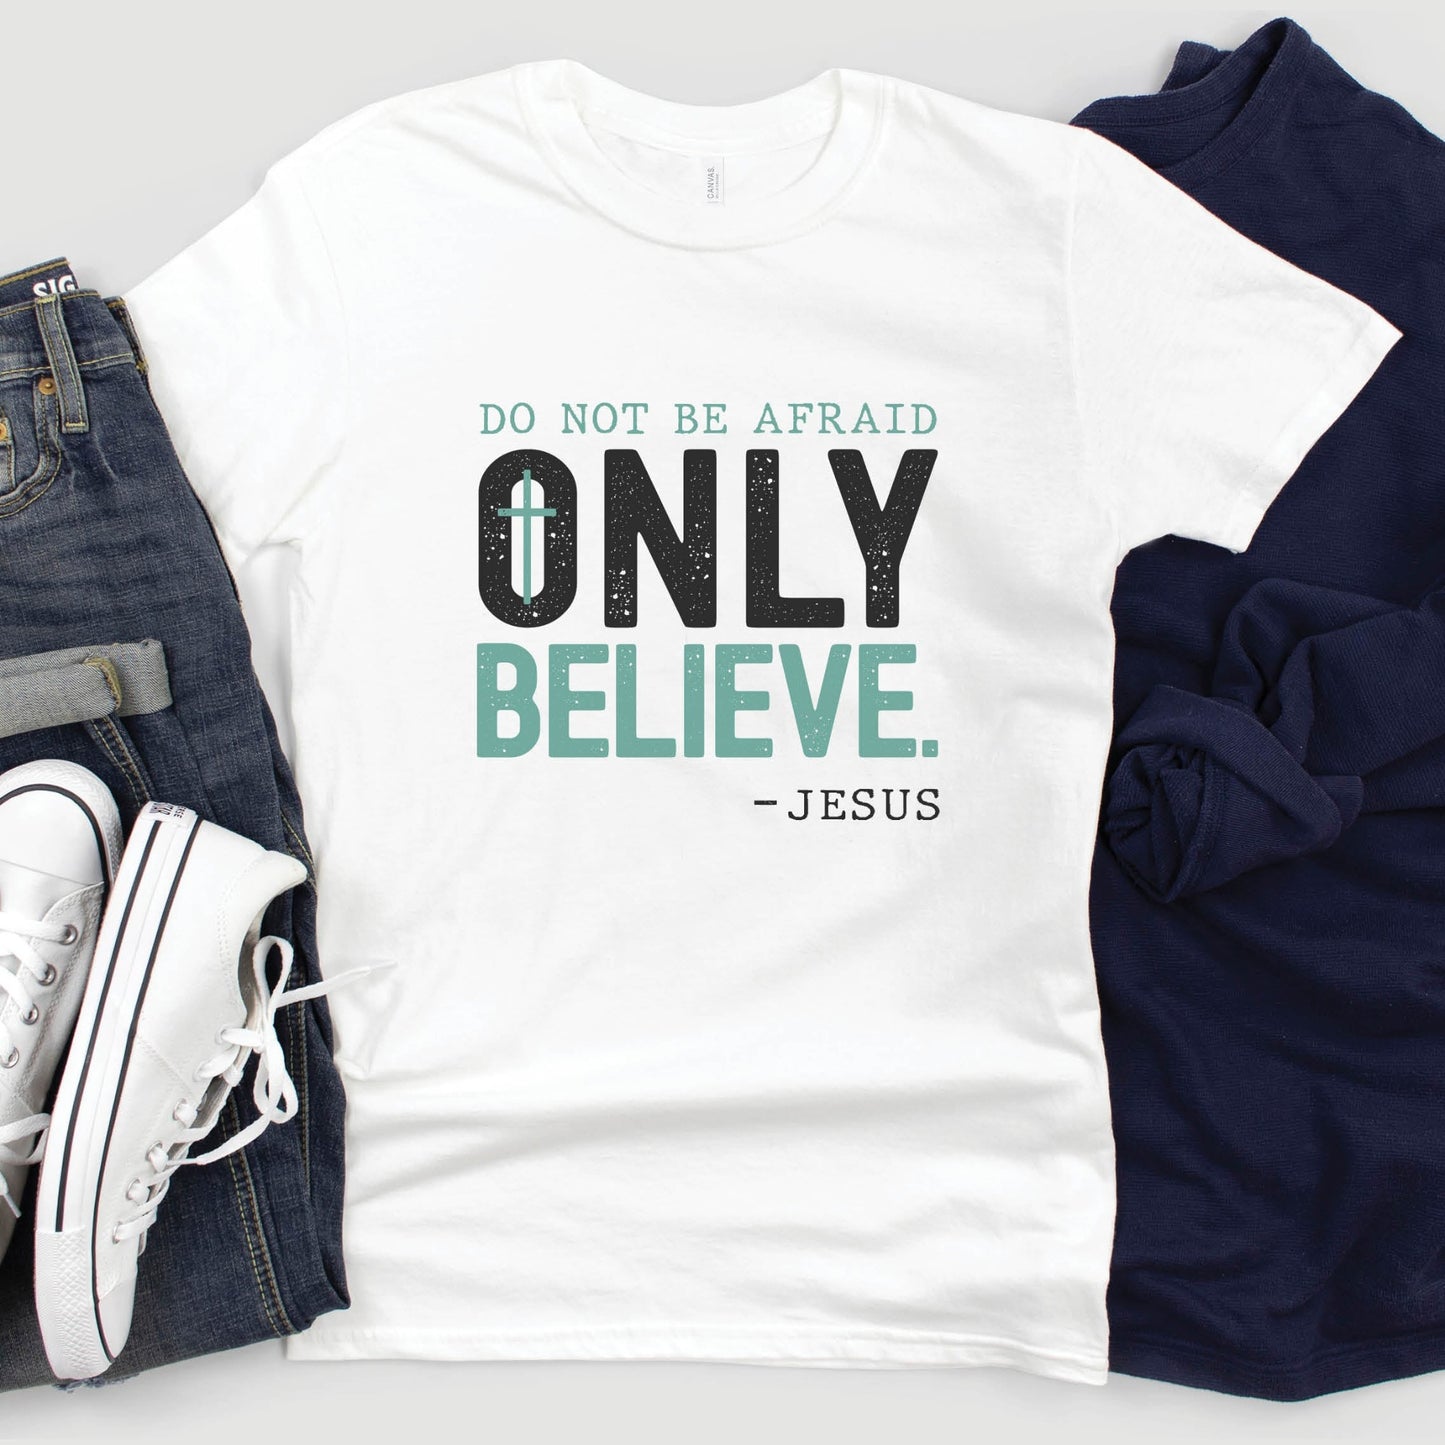 Do Not Be Afraid, Only Believe, Jesus Quote Christian aesthetic Mark 5:36 healing miracle bible verse textured black and teal wording printed on soft white unisex t-shirt for men and women